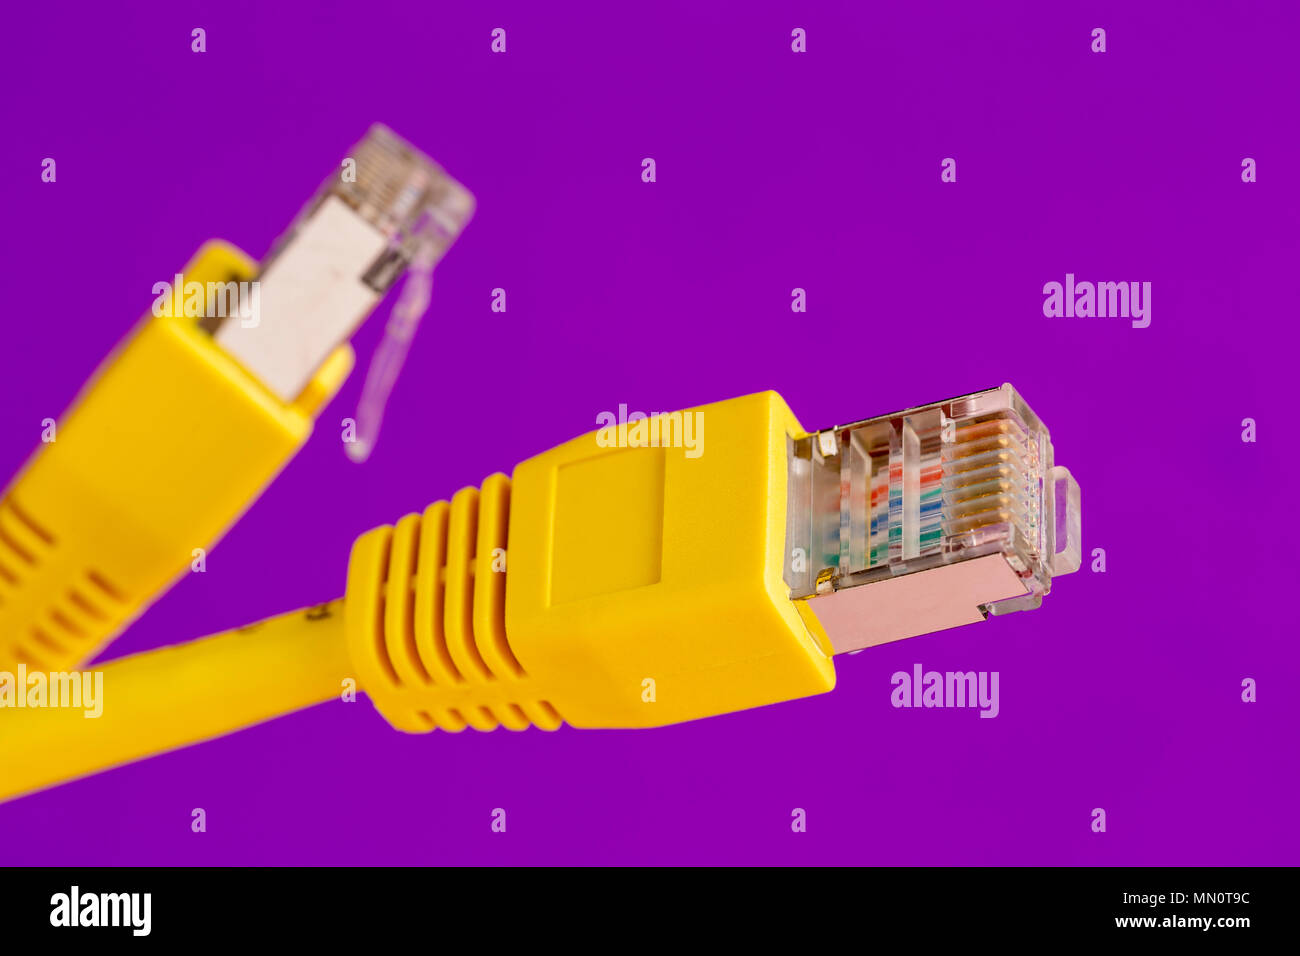 Two yellow ethernet connector on purple background Stock Photo